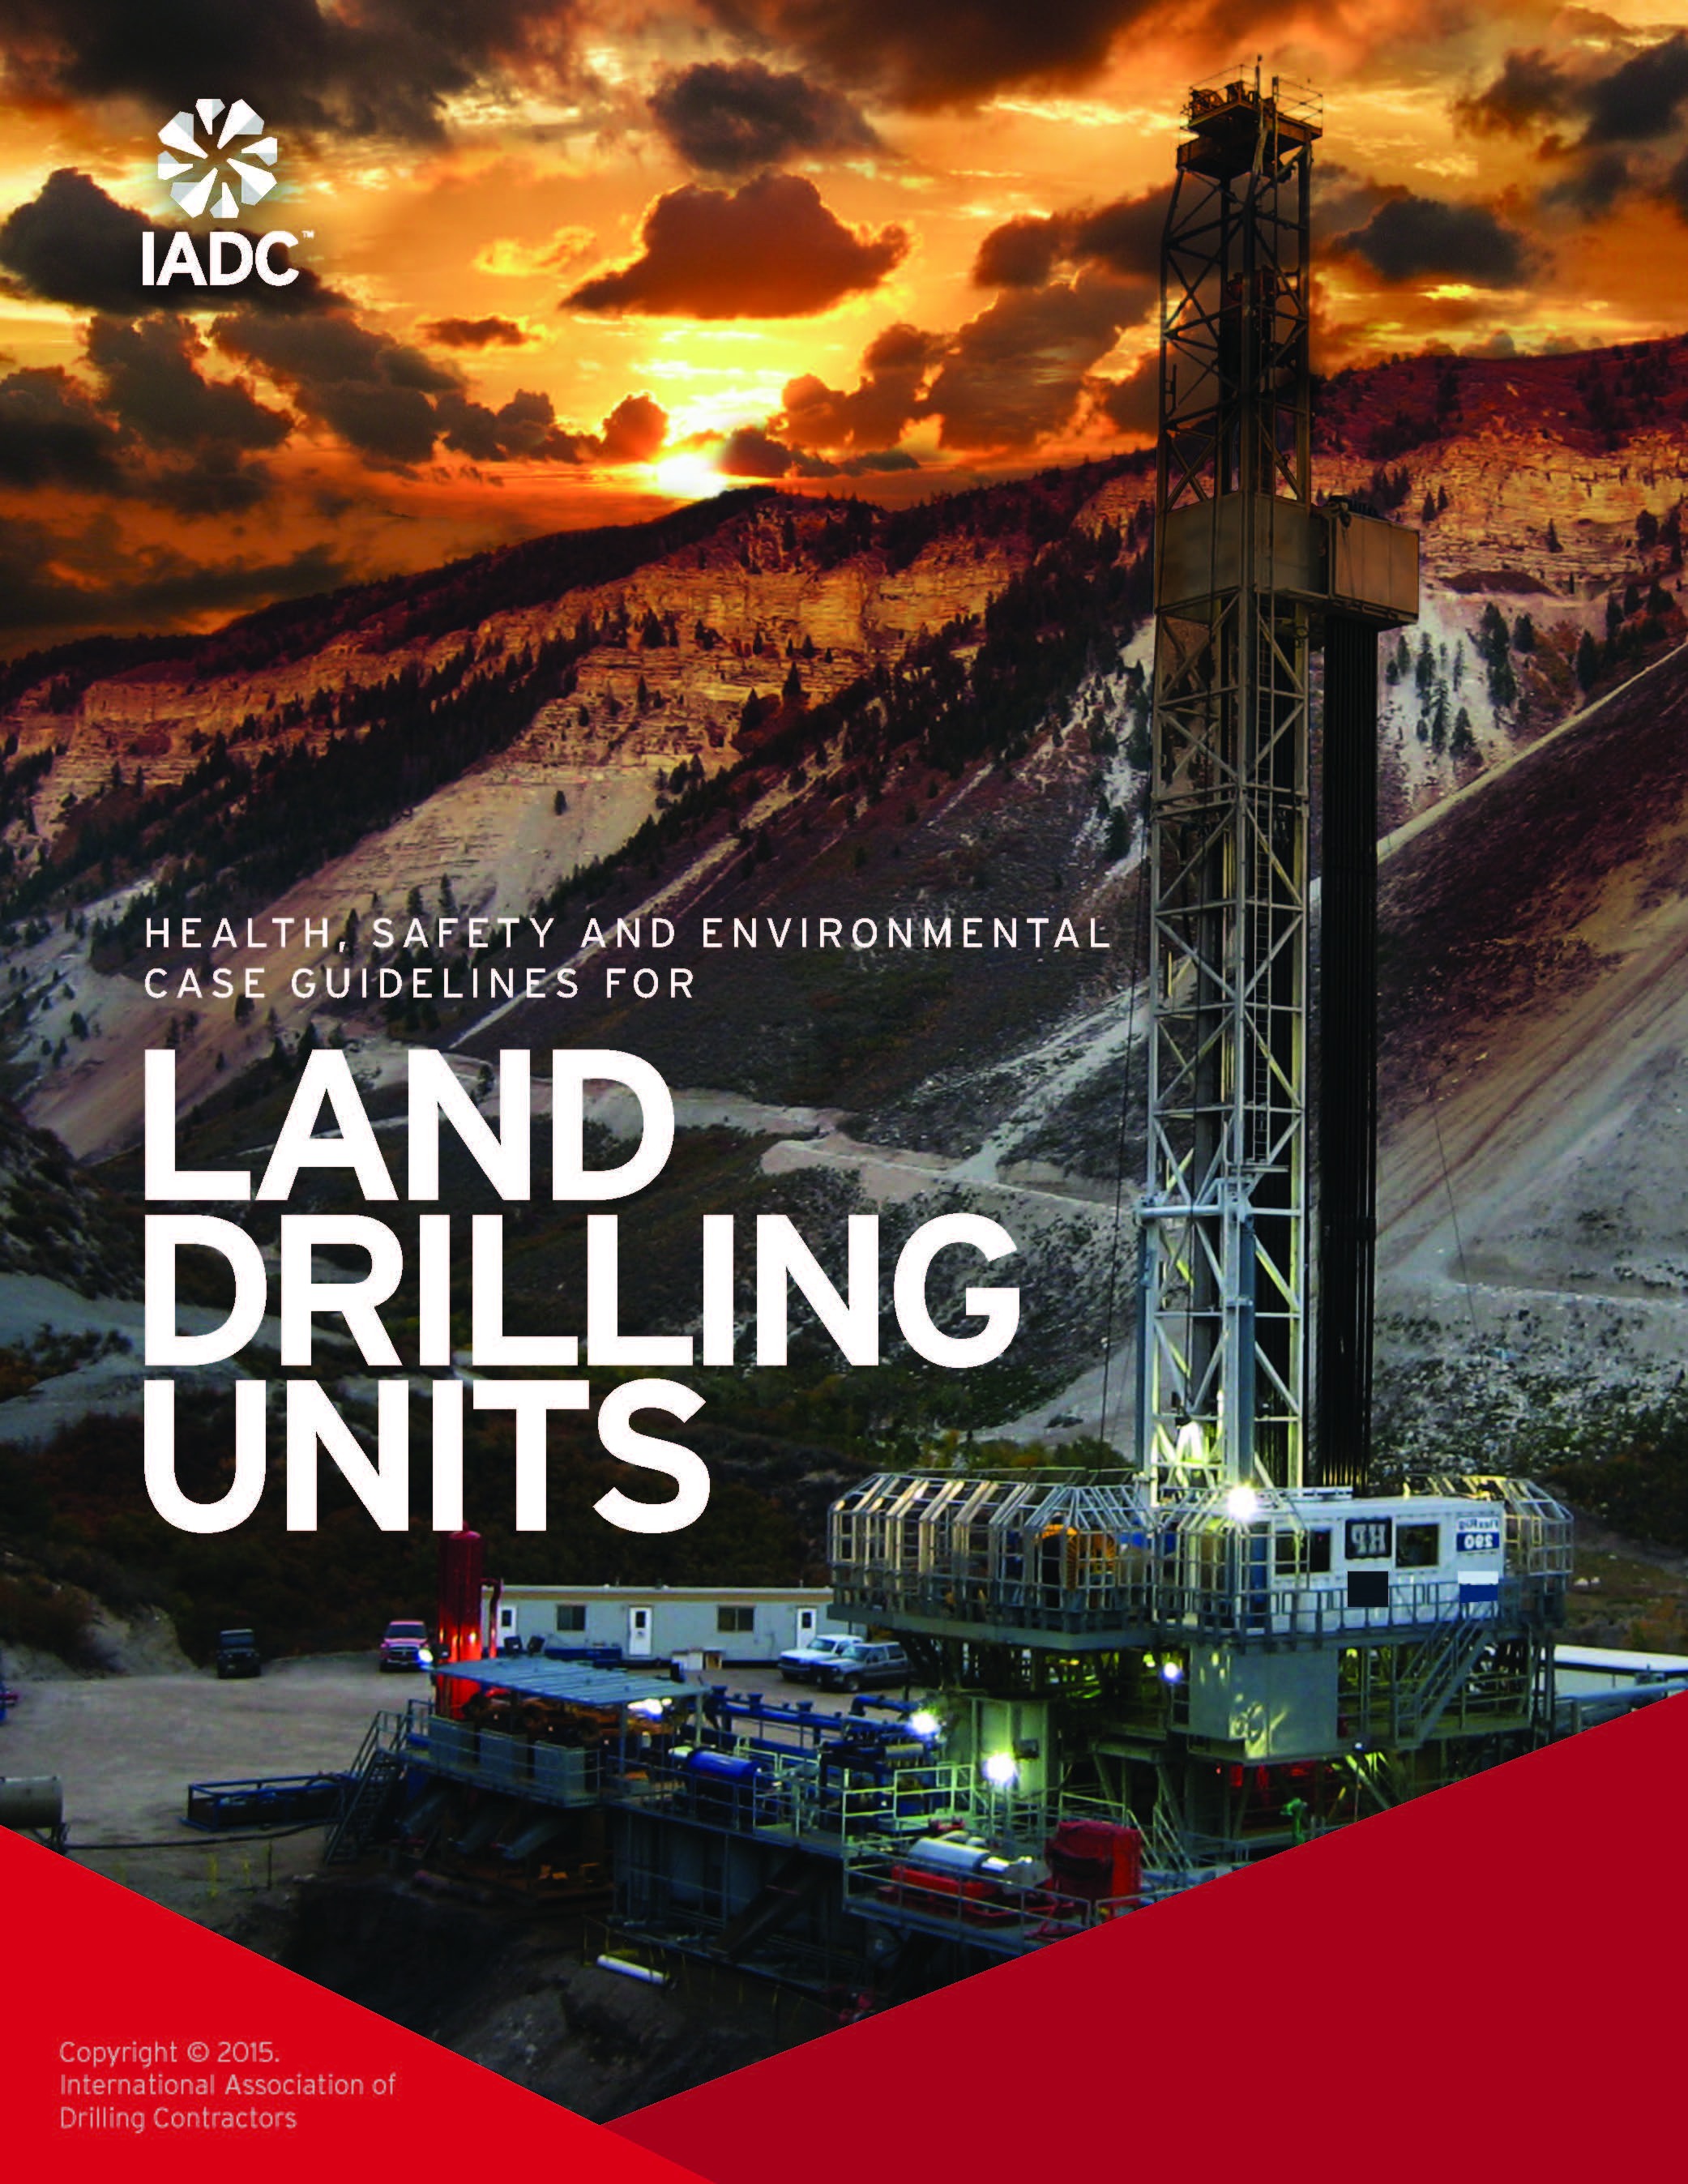 IADC HSE Case Guidelines for Land Drilling Units